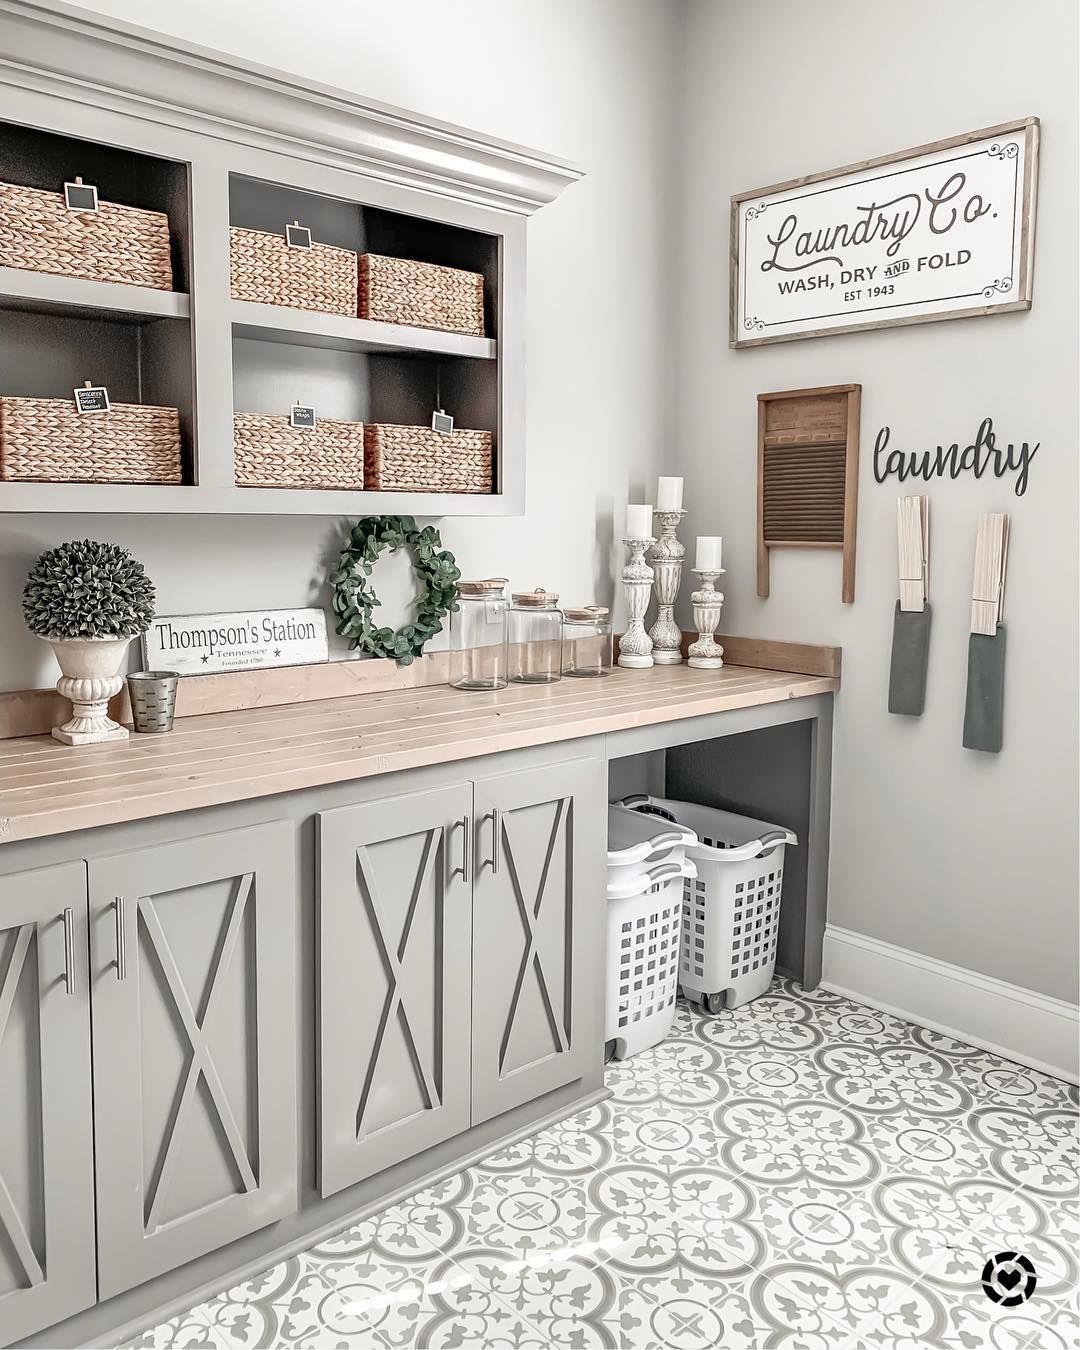 Farmhouse Laundry Room with Woven Baskets and Barn Cabinets via @the_lifestyleloop